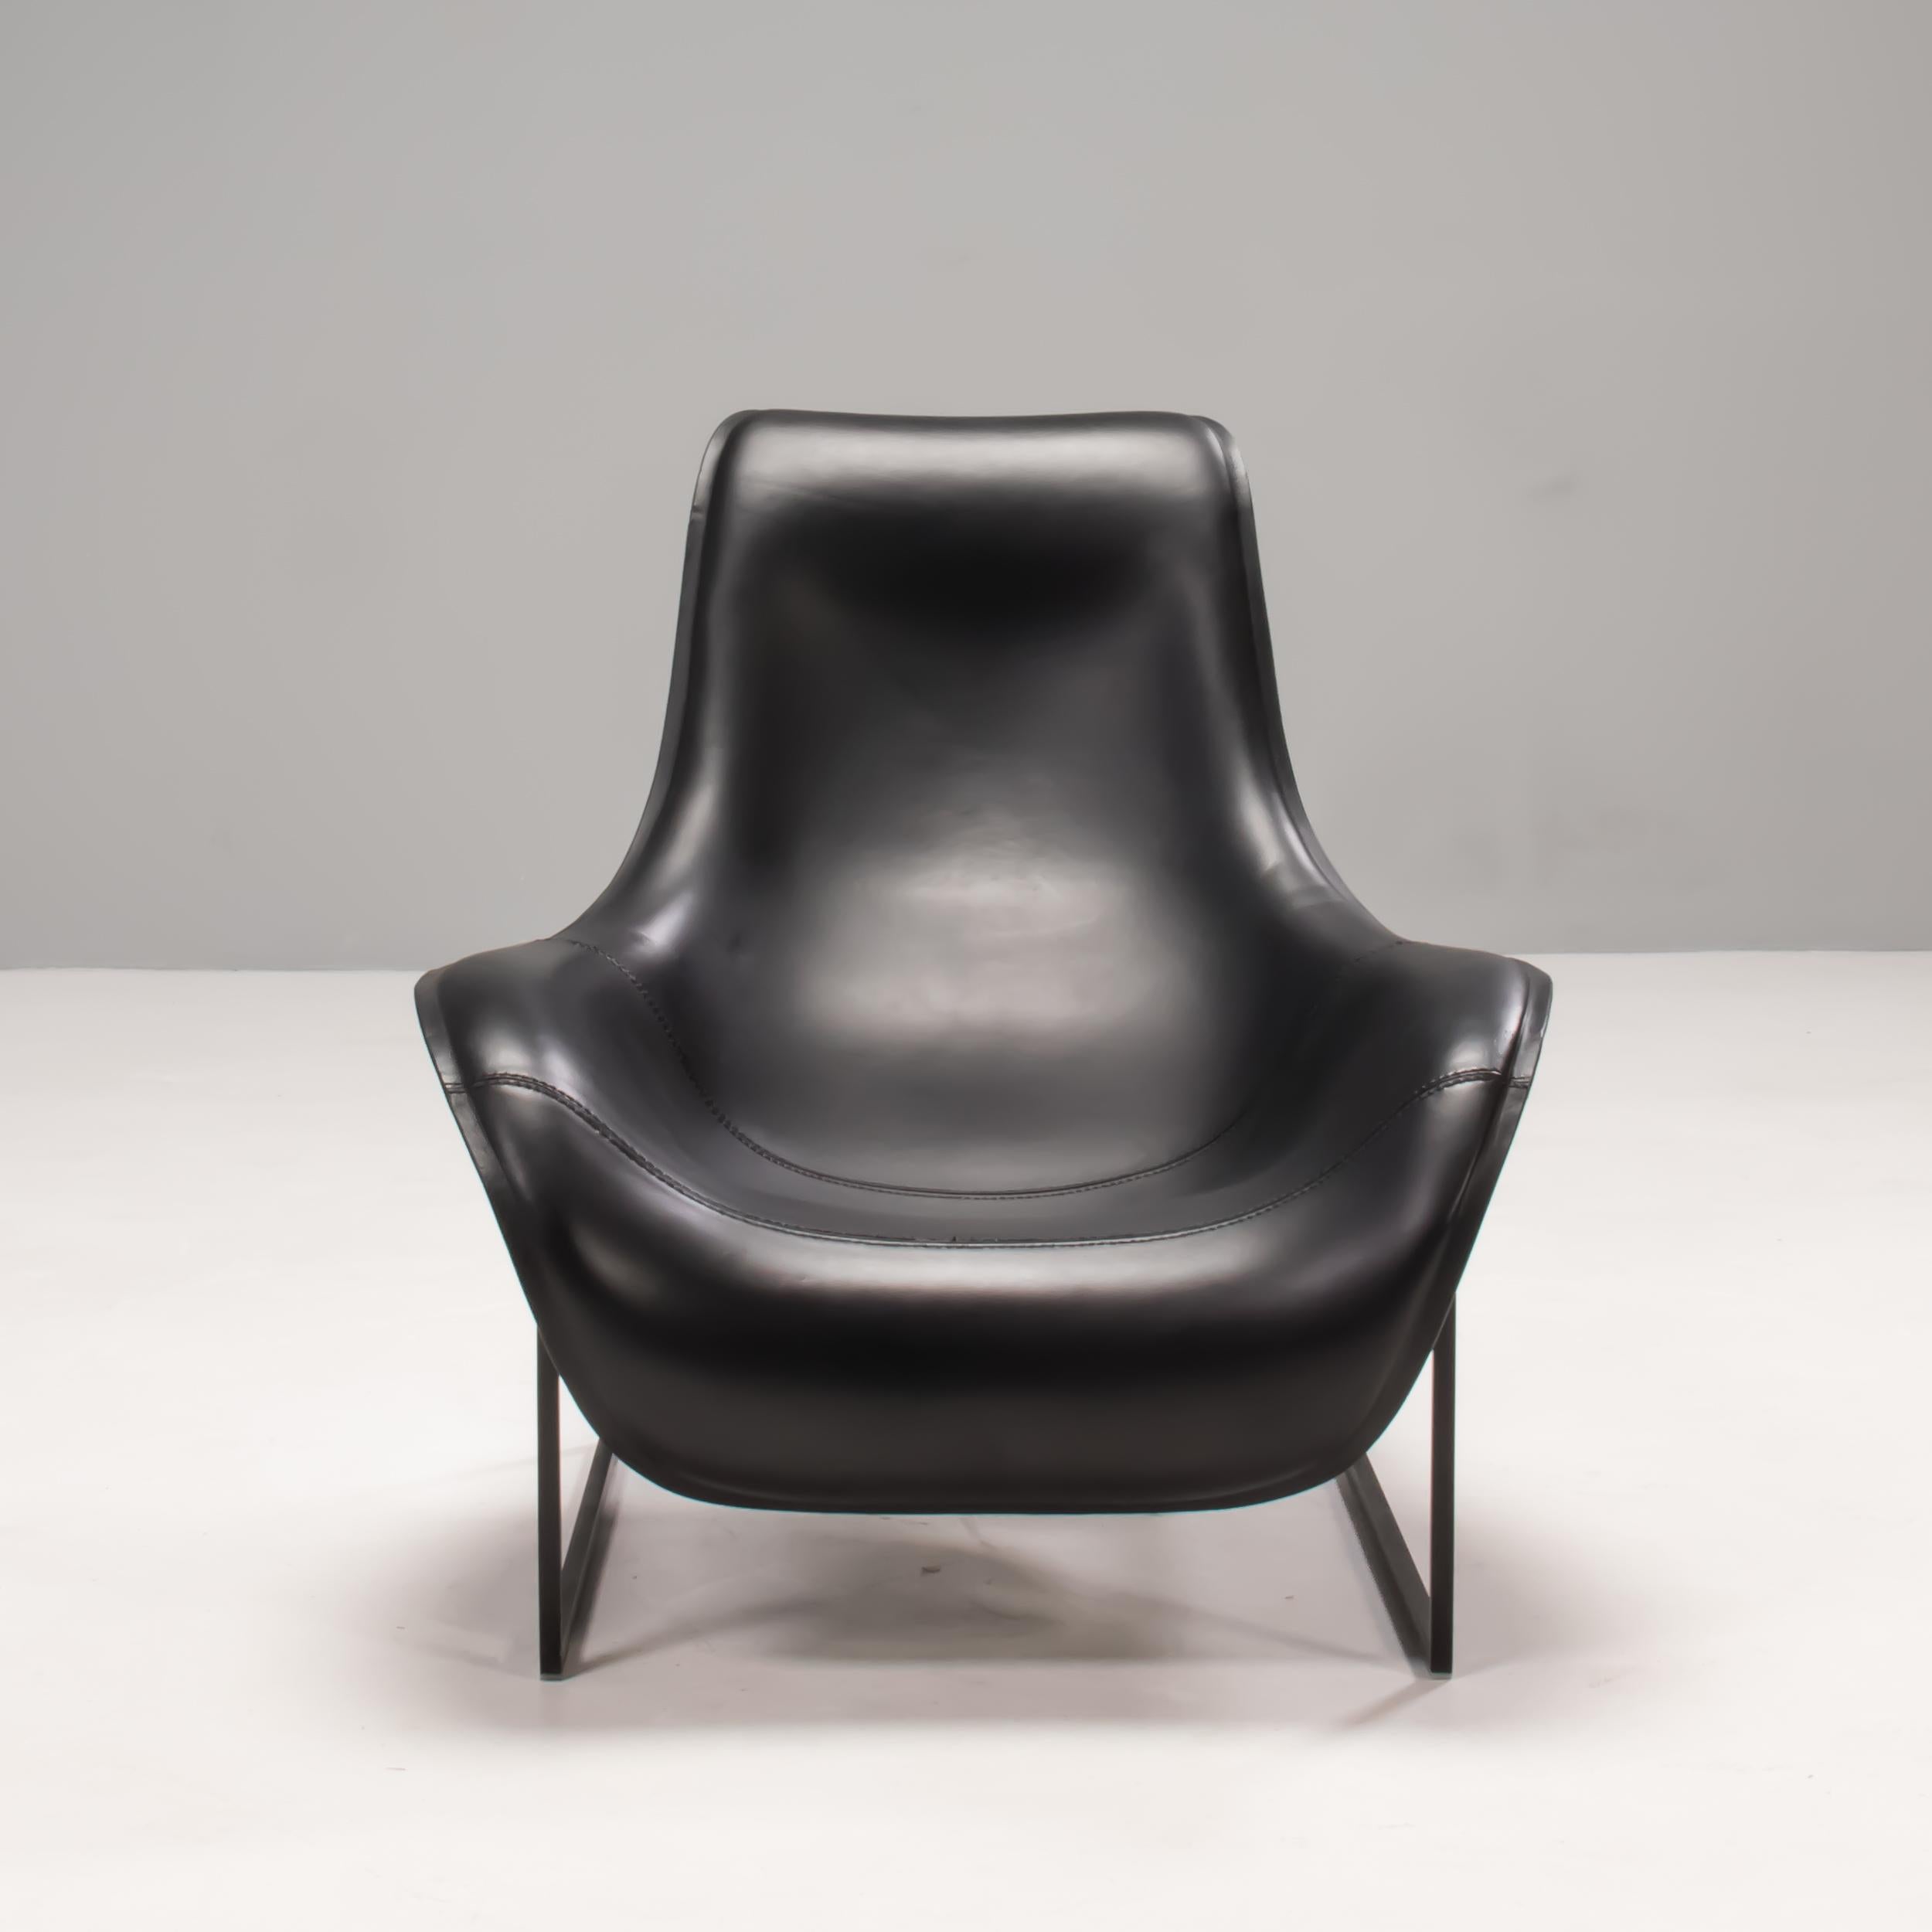 Originally designed by Antonio Citterio for B&B Italia in 2003, the Mart lounge chair is a fantastic example of modern design.

The sinuous silhouette is created through the use of shaped polyurethane foam and thermoformed leather, which gives a